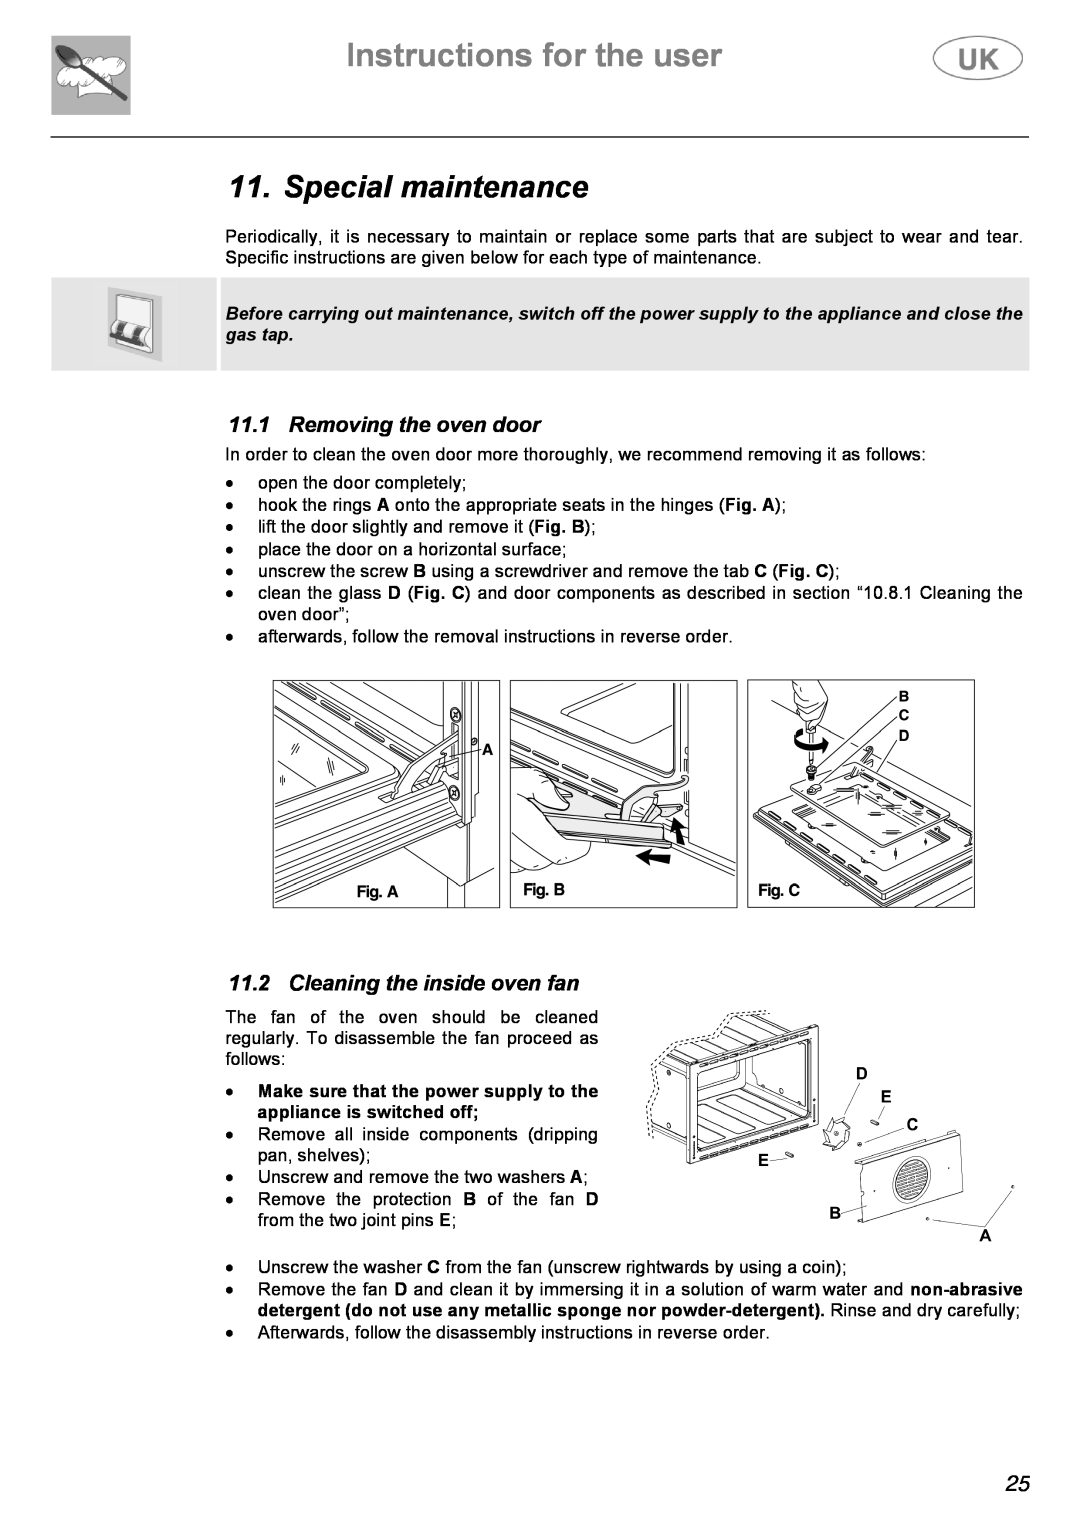 AEG C41022GN manual Special maintenance, Removing the oven door, Cleaning the inside oven fan, Instructions for the user 